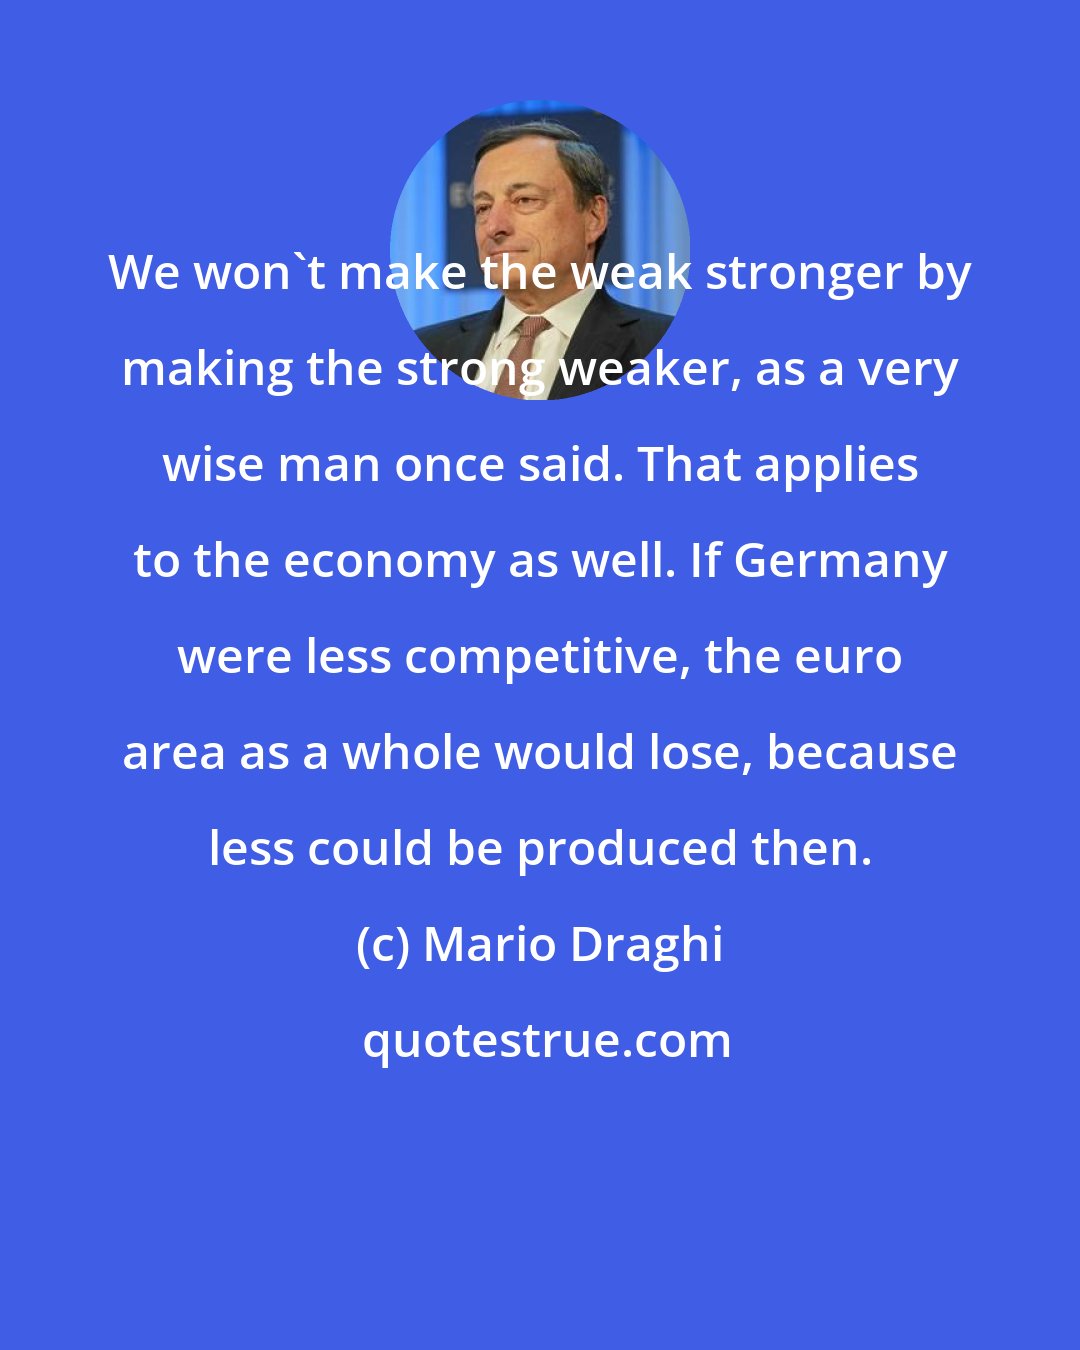 Mario Draghi: We won't make the weak stronger by making the strong weaker, as a very wise man once said. That applies to the economy as well. If Germany were less competitive, the euro area as a whole would lose, because less could be produced then.